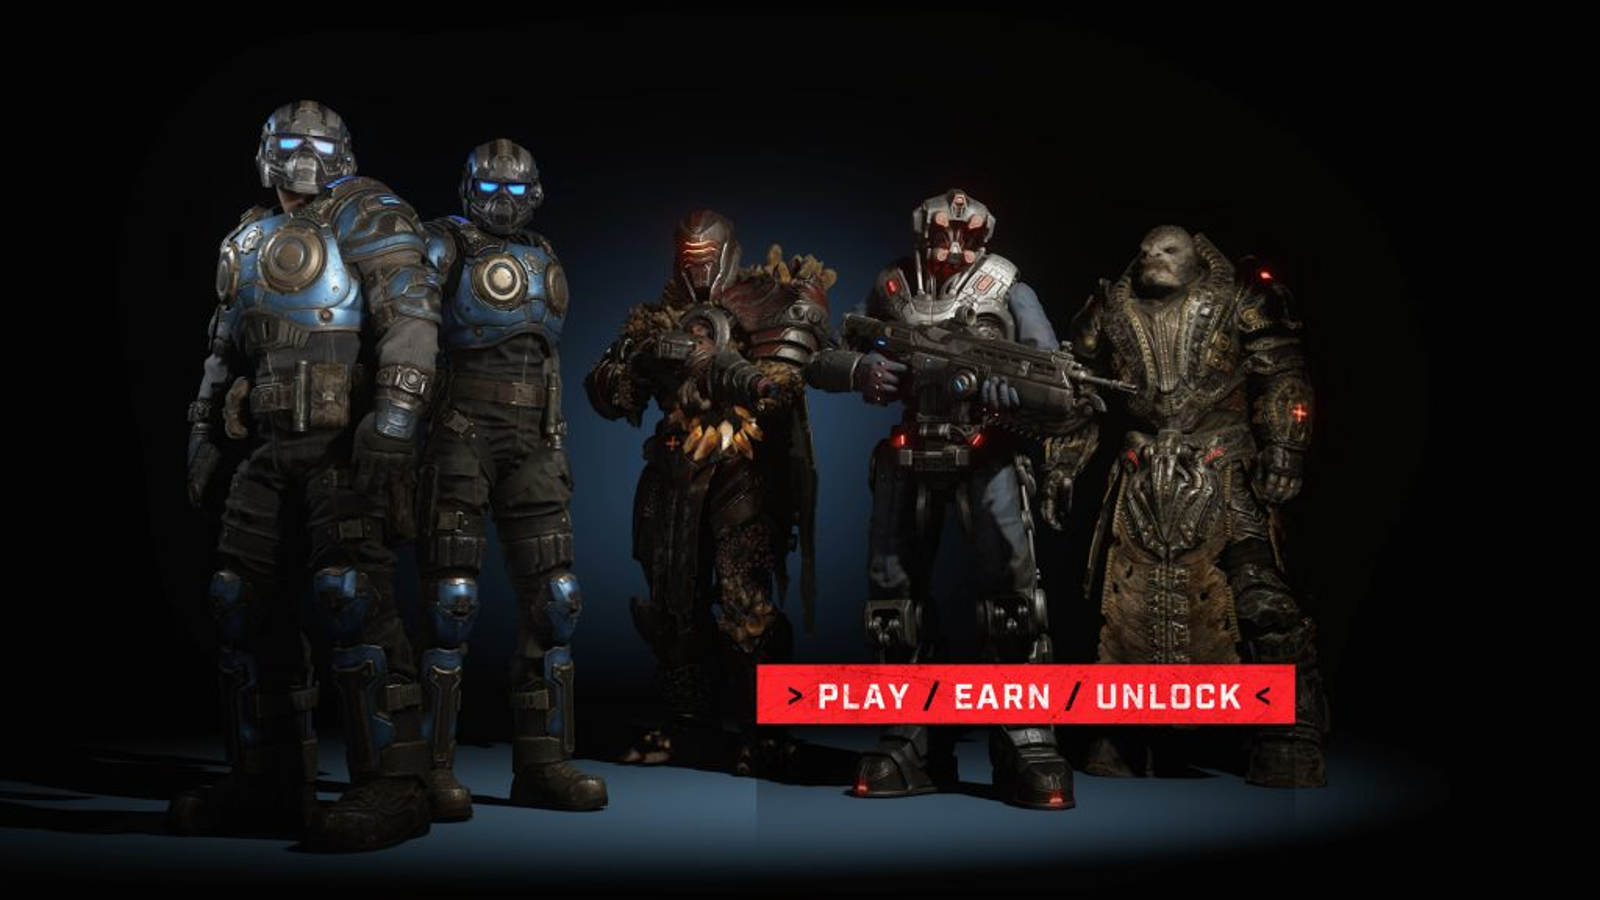 Fortnite Gears Of War Skins Are Launching Today, December 9 - GameSpot